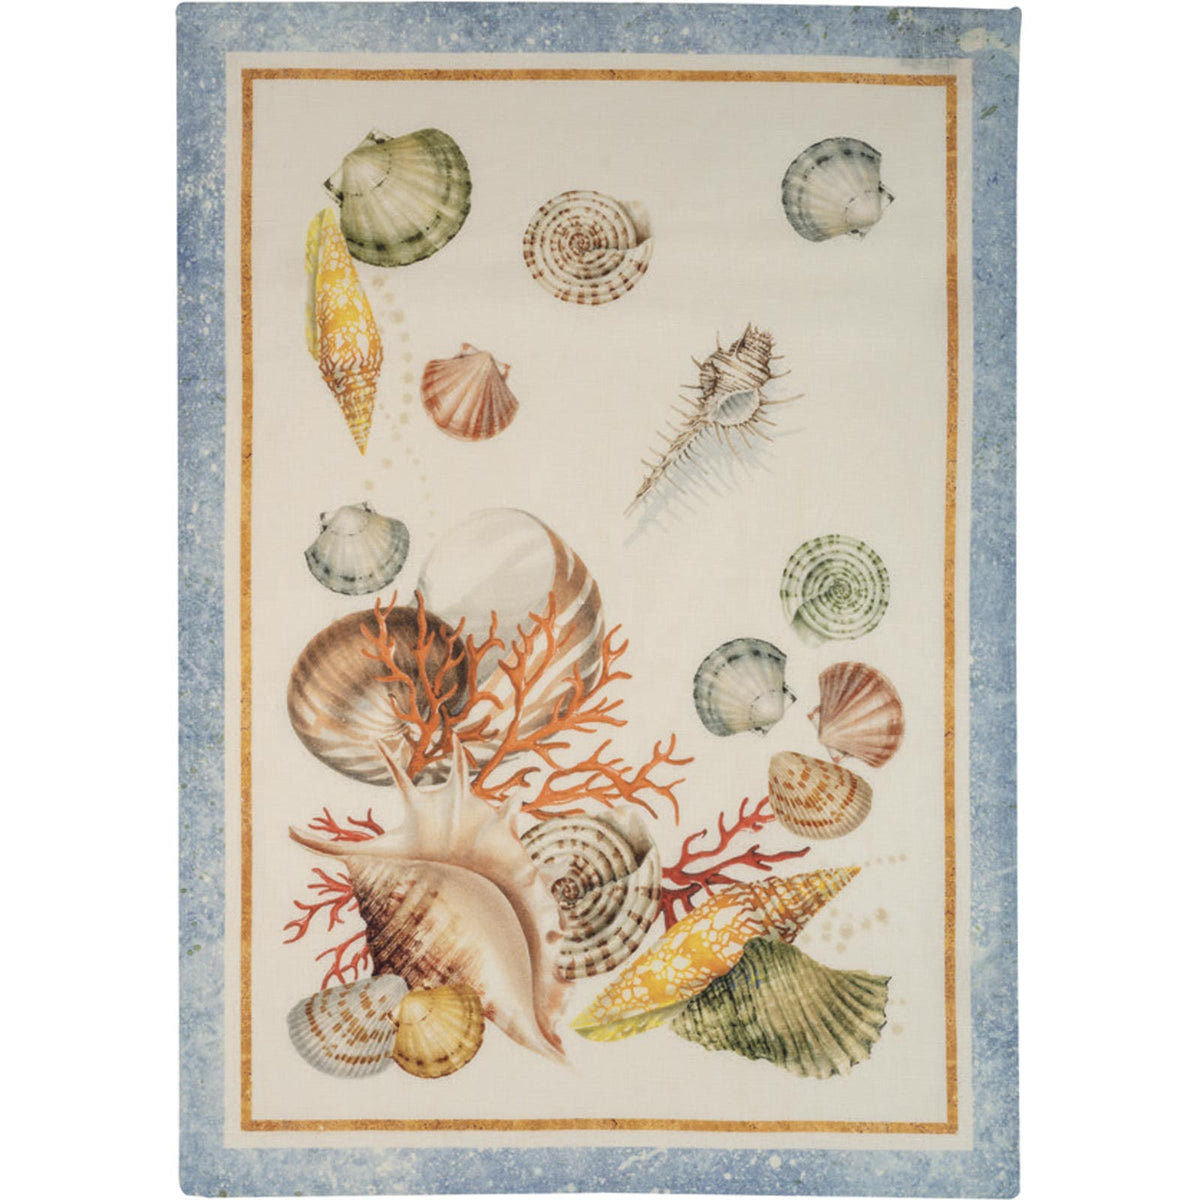 Sanibel Kitchen Towel with a Light Blue Border and Watercolor Images of Shells and Coral. Sold as part of a set of 2 from Caskata